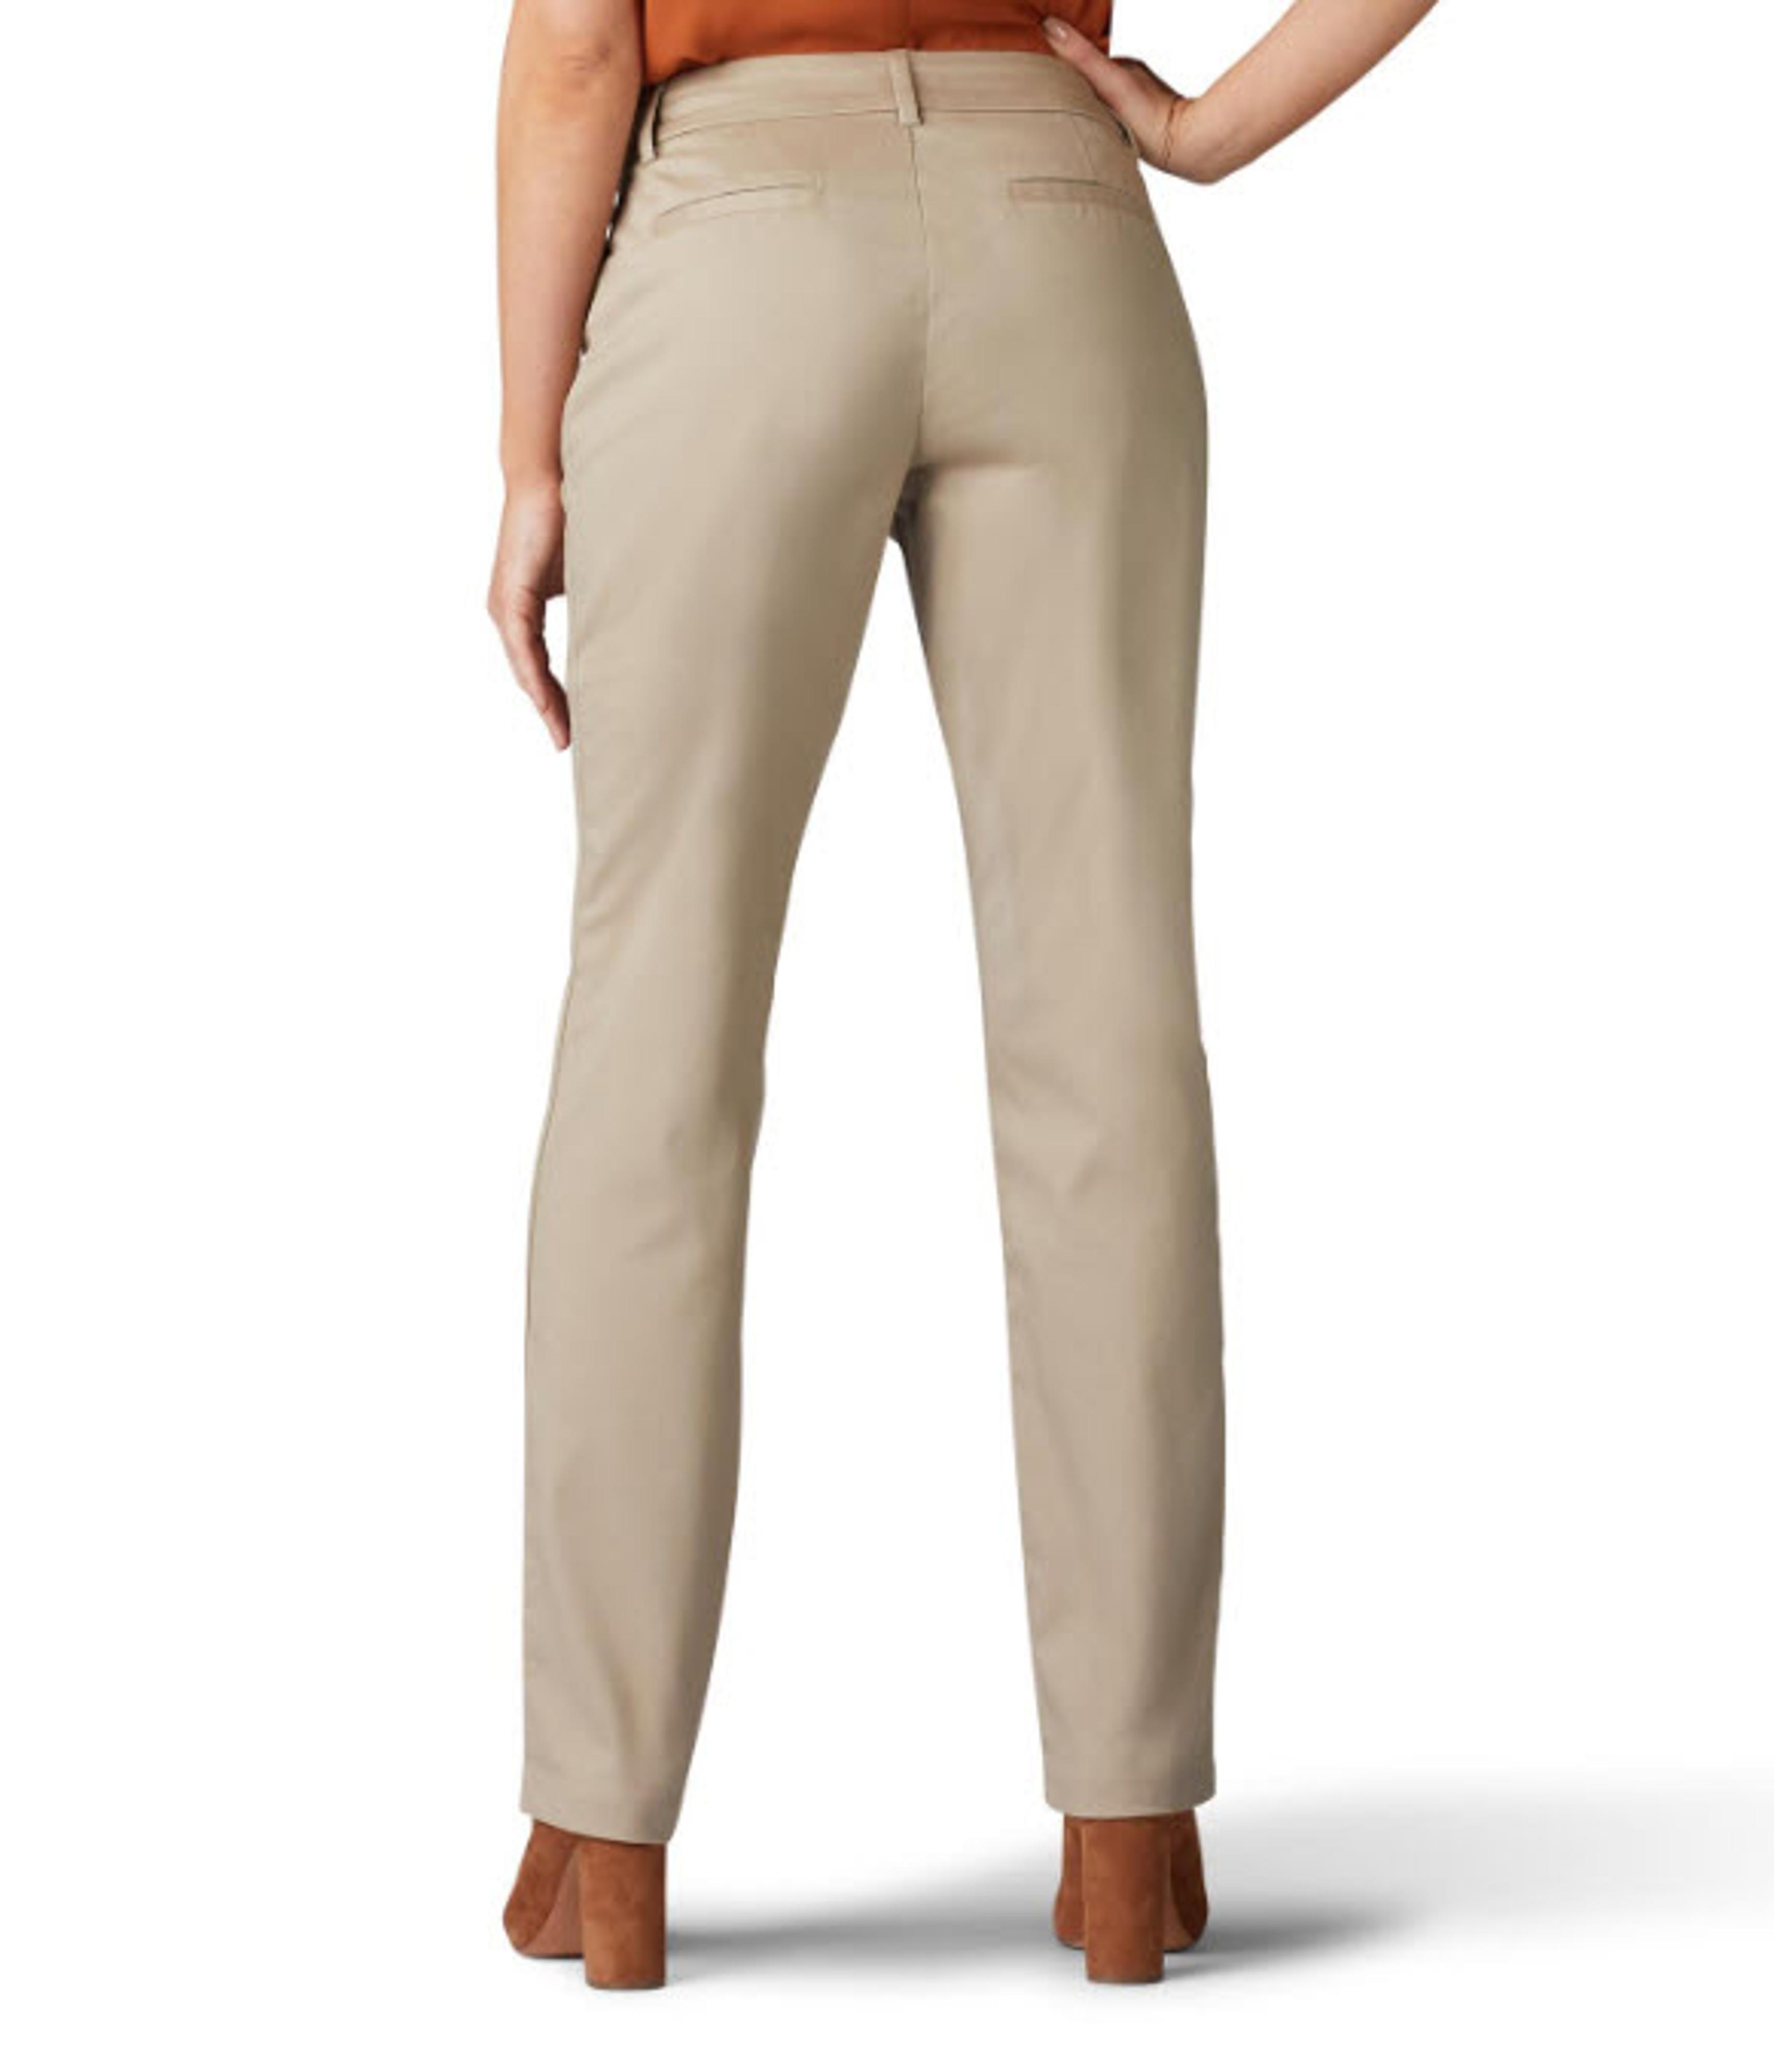 Lee Womens Missy Relaxed Wrinkle Free Straight Leg Pant